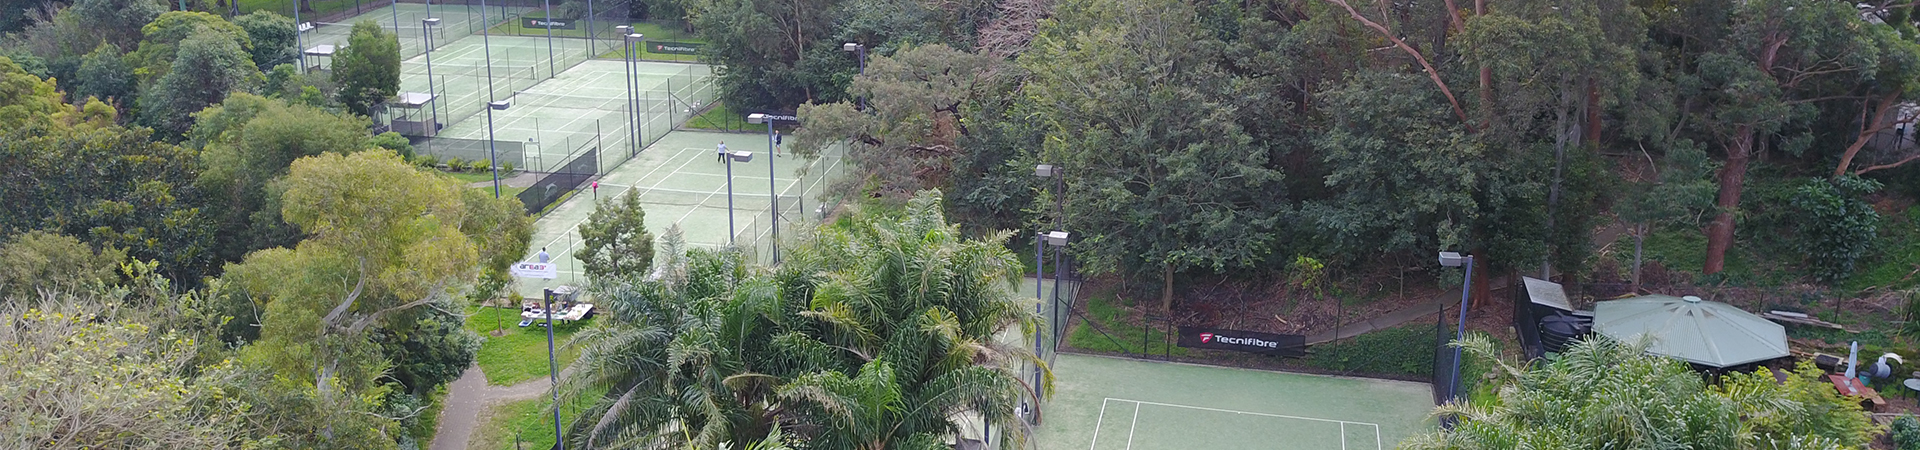 wentworth tennis and palms tennis centre